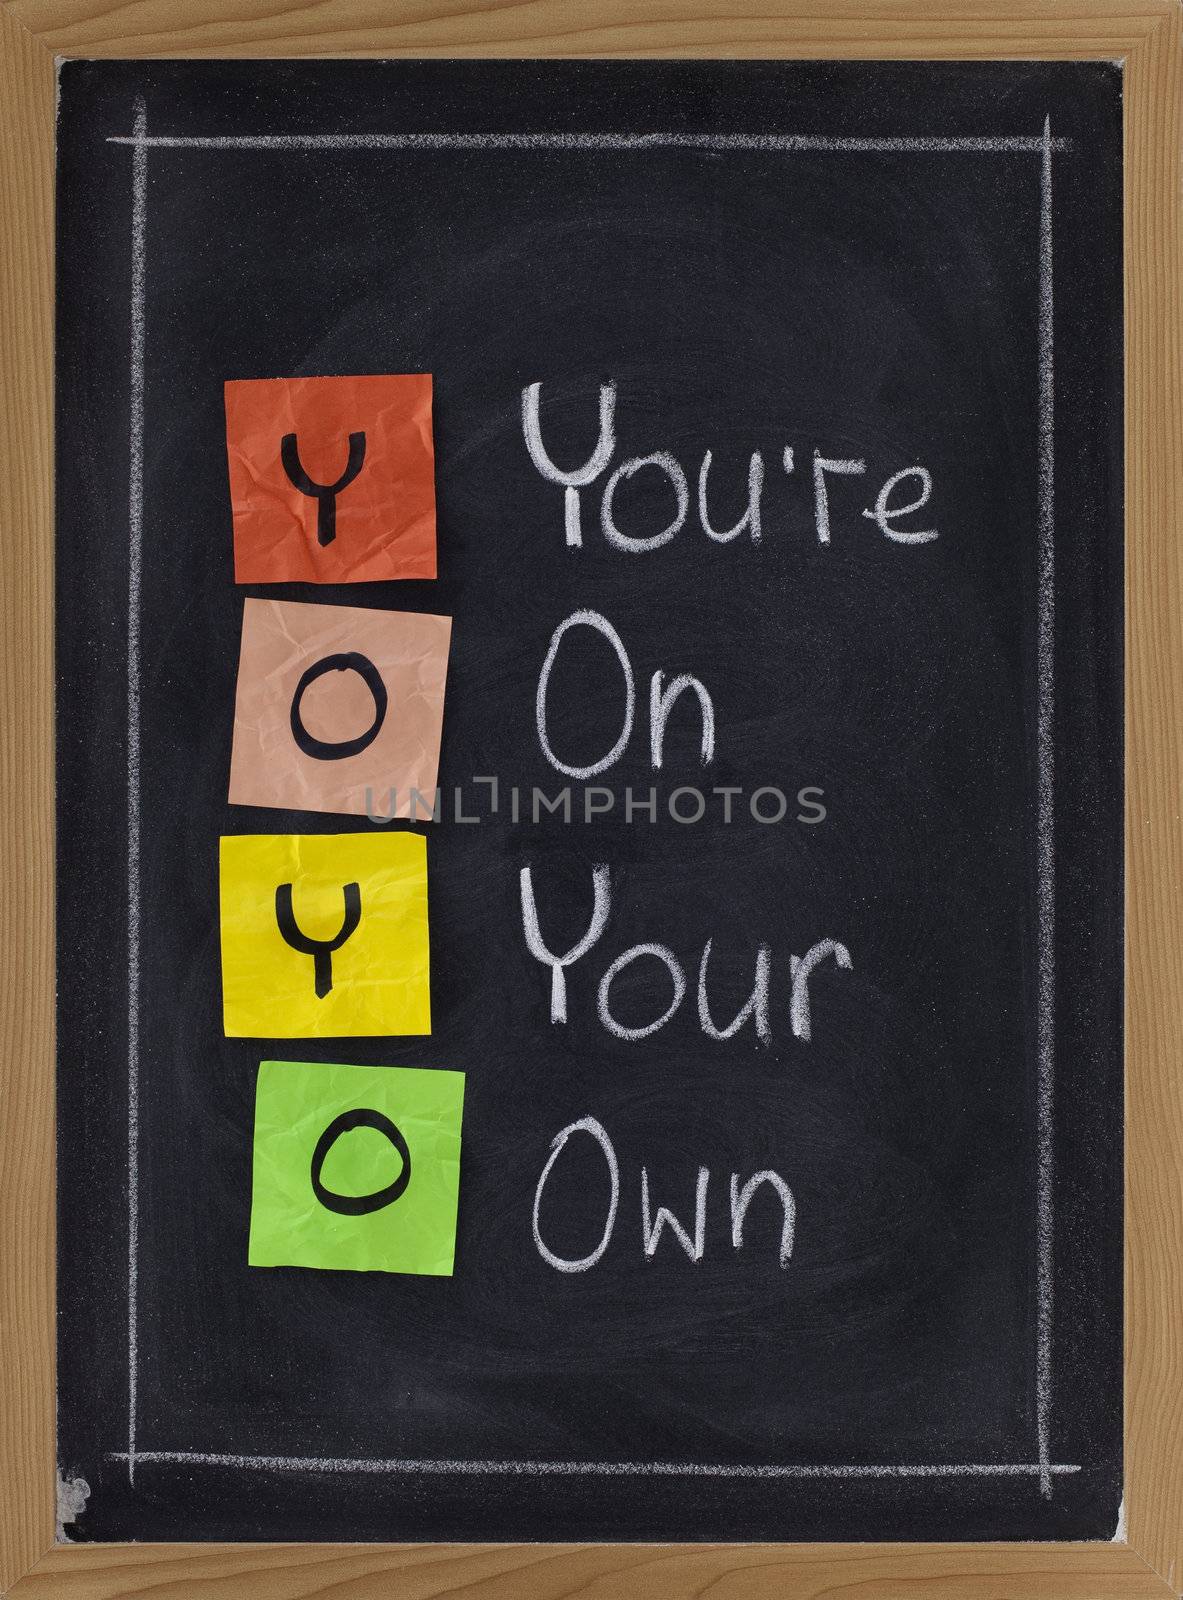 YOYO acronym (you are on your own), sticky notes and white chalk handwriting on blackboard